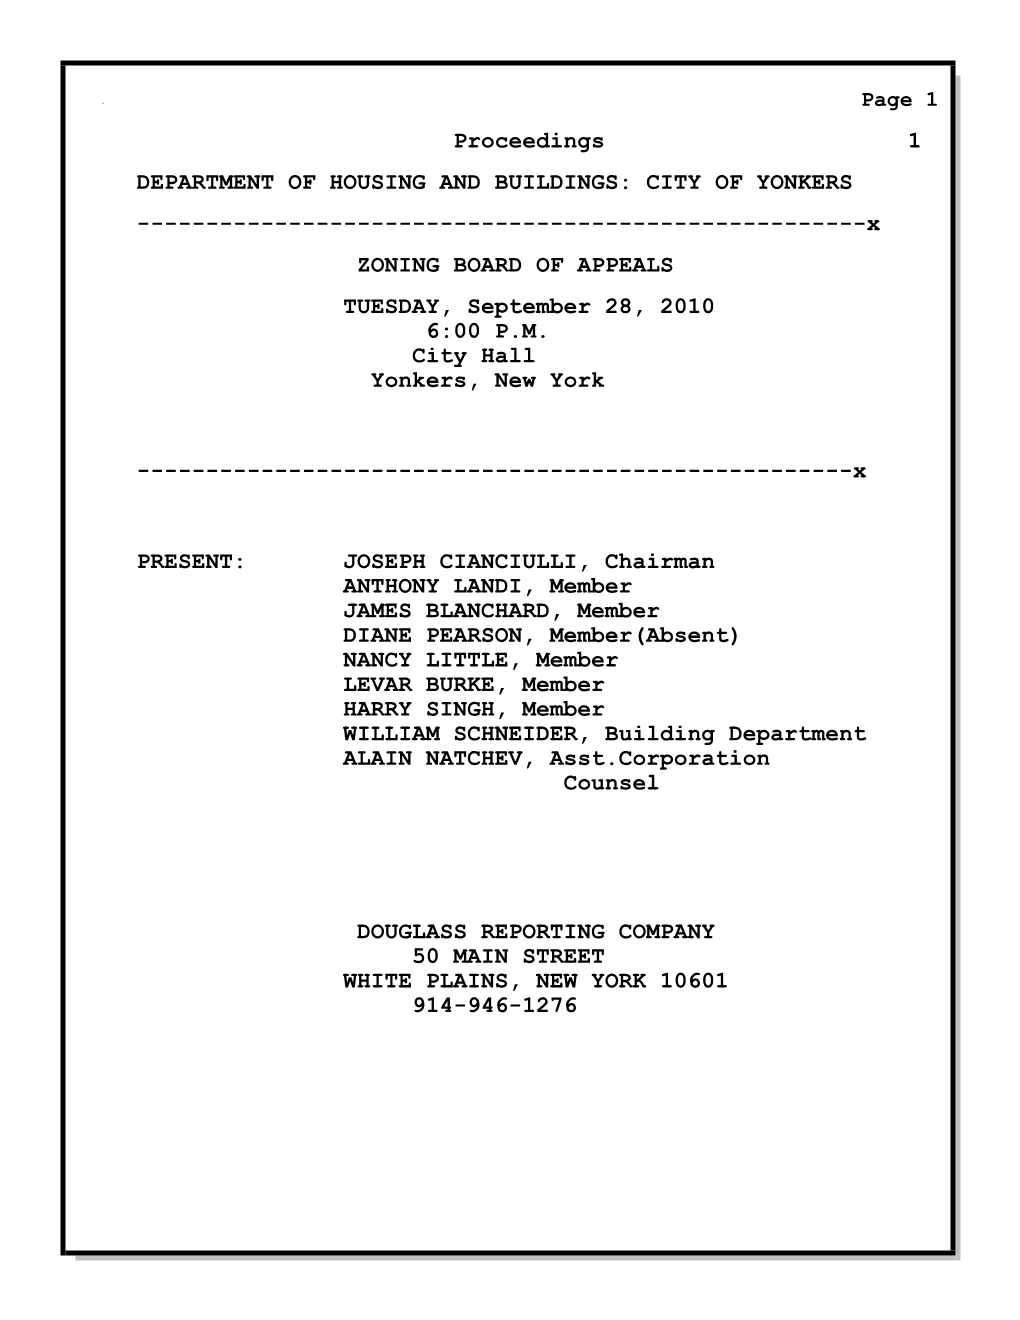 Proceedings 1 DEPARTMENT of HOUSING and BUILDINGS: CITY of YONKERS ------X ZONING BOARD of APPEALS TUESDAY, September 28, 2010 6:00 P.M